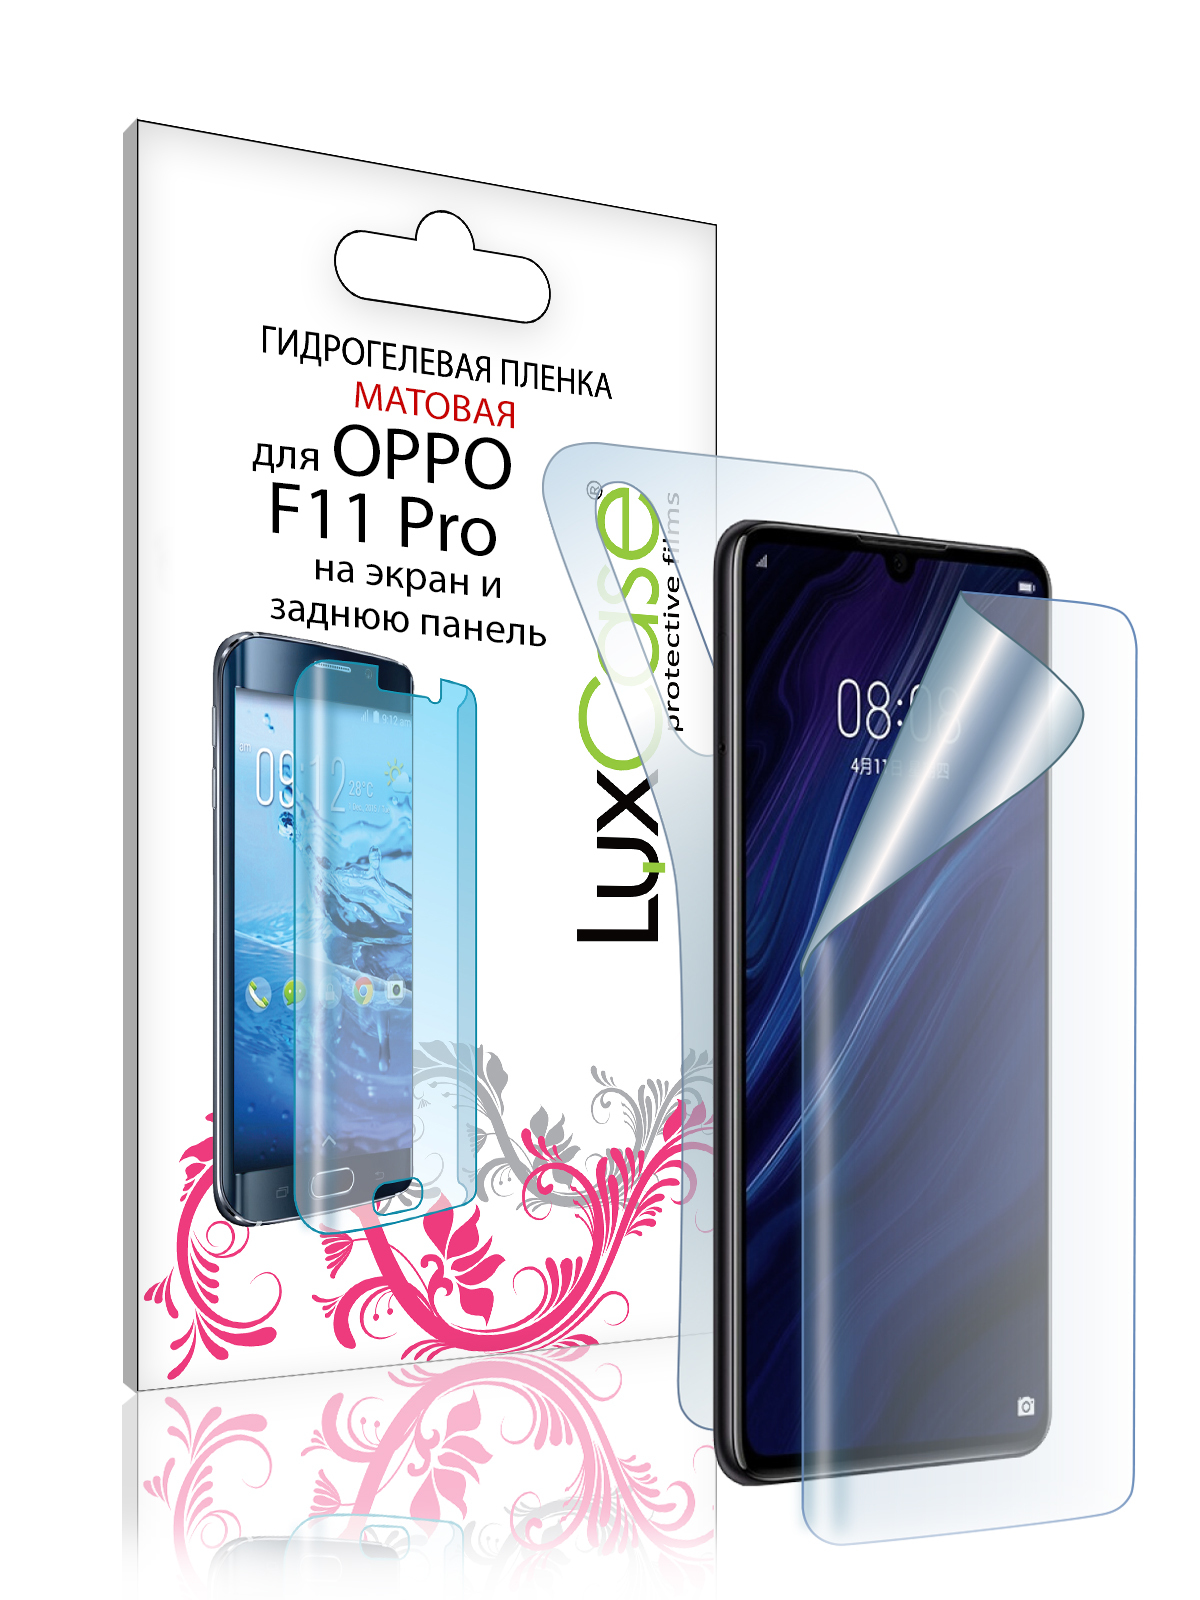 Пленка гидрогелевая LuxCase для Oppo F11 Pro 0.14mm Front and Back Matte 86776 гидрогелевая пленка luxcase для oppo f11 pro 0 14mm back matte 86775